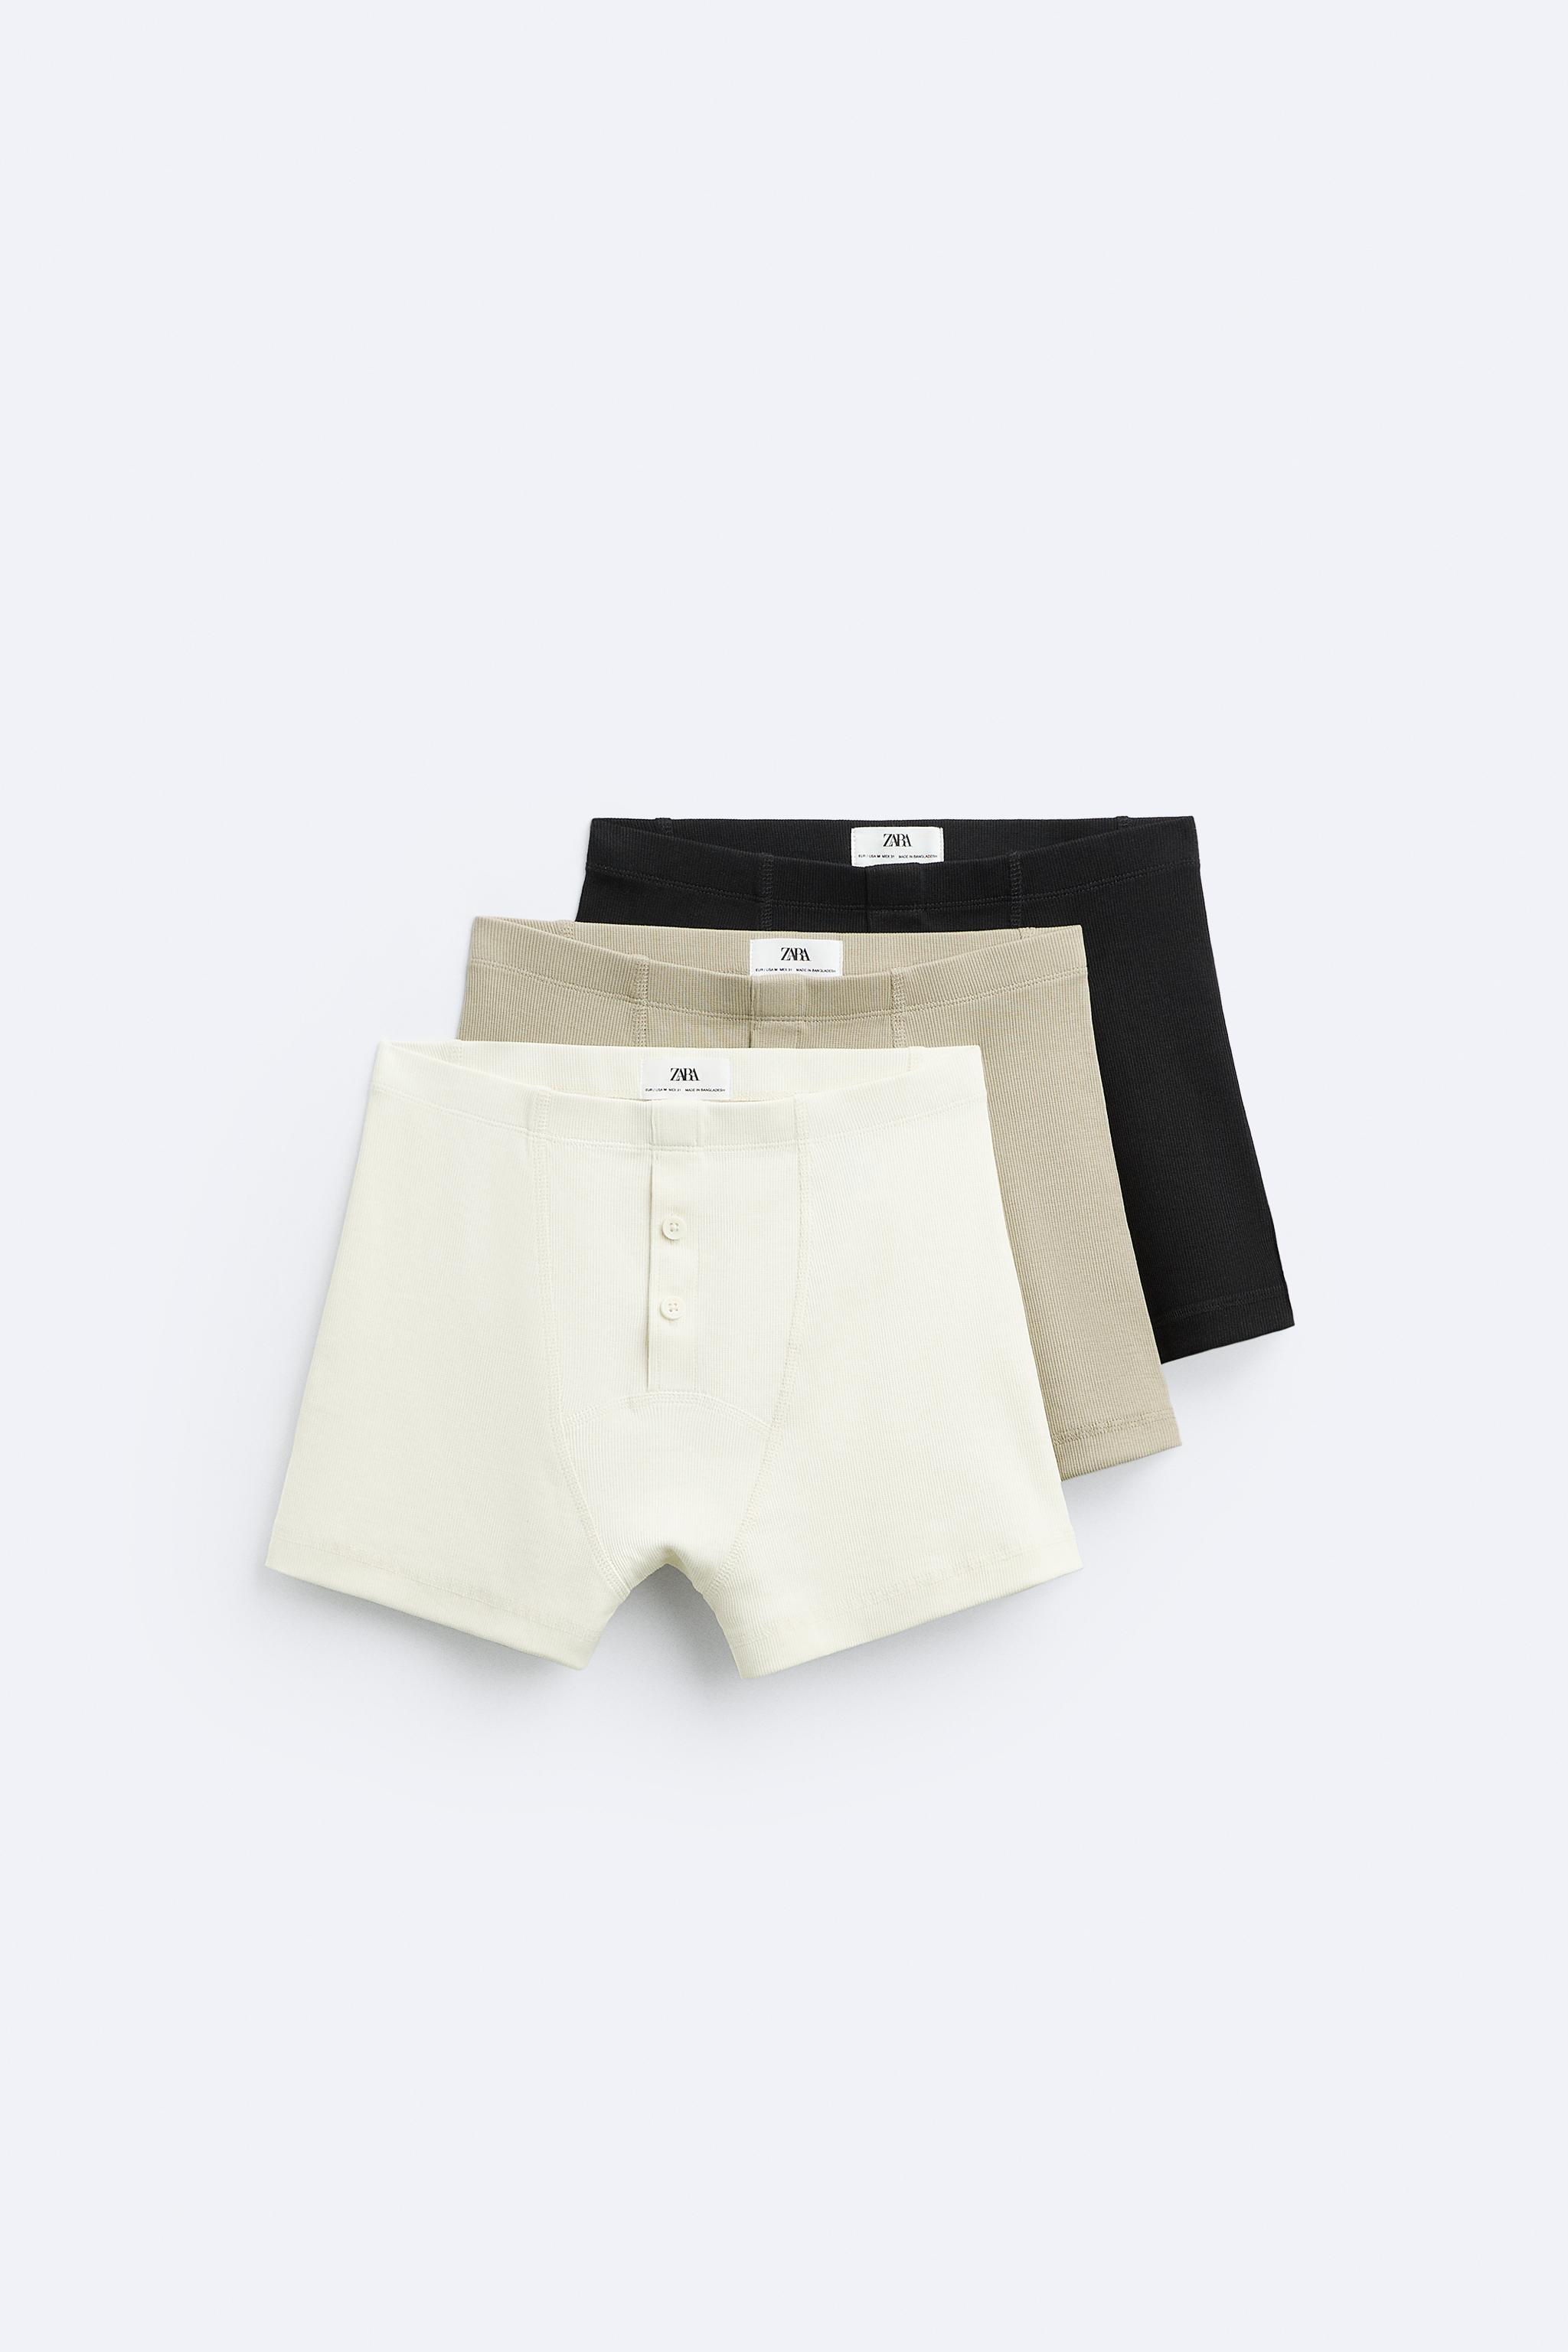 Zara Boxers in Surulere - Clothing, His And Her Underwears